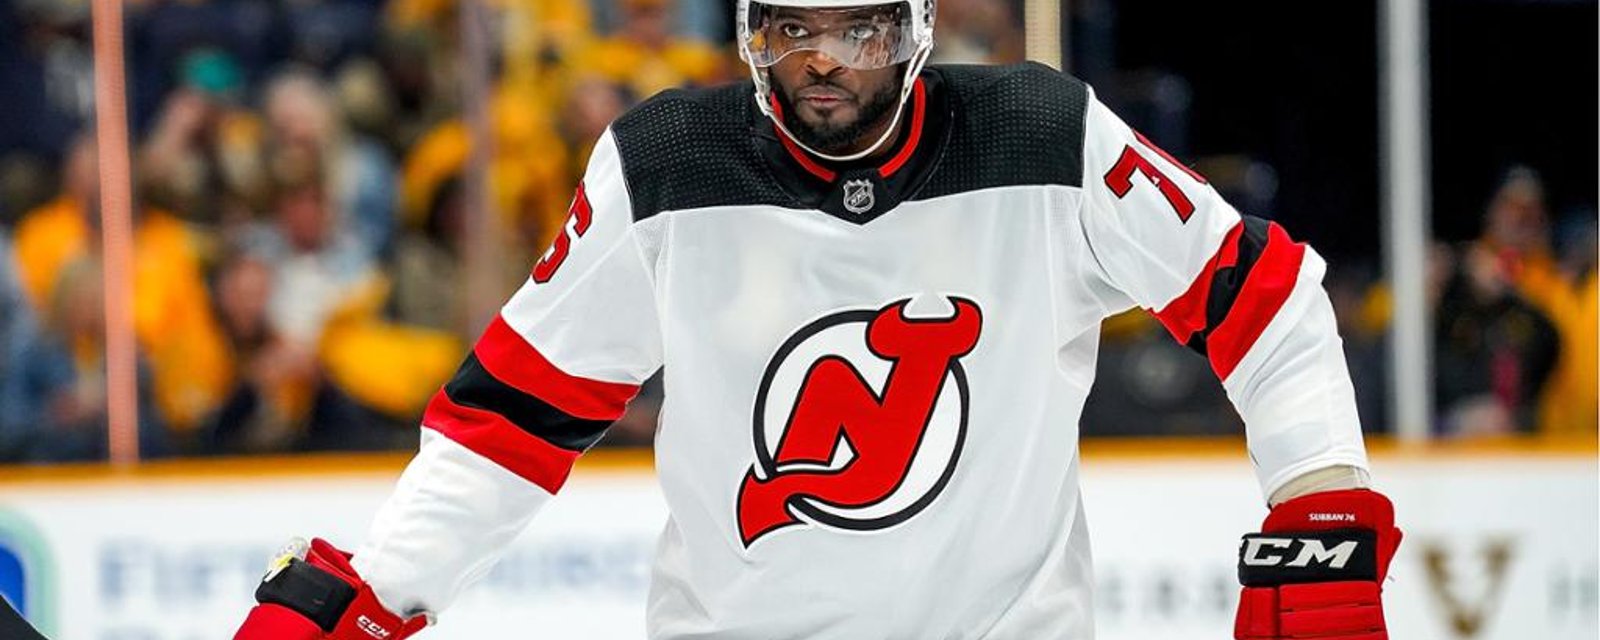 P.K. Subban was only ready to accept an offer from 2 teams!